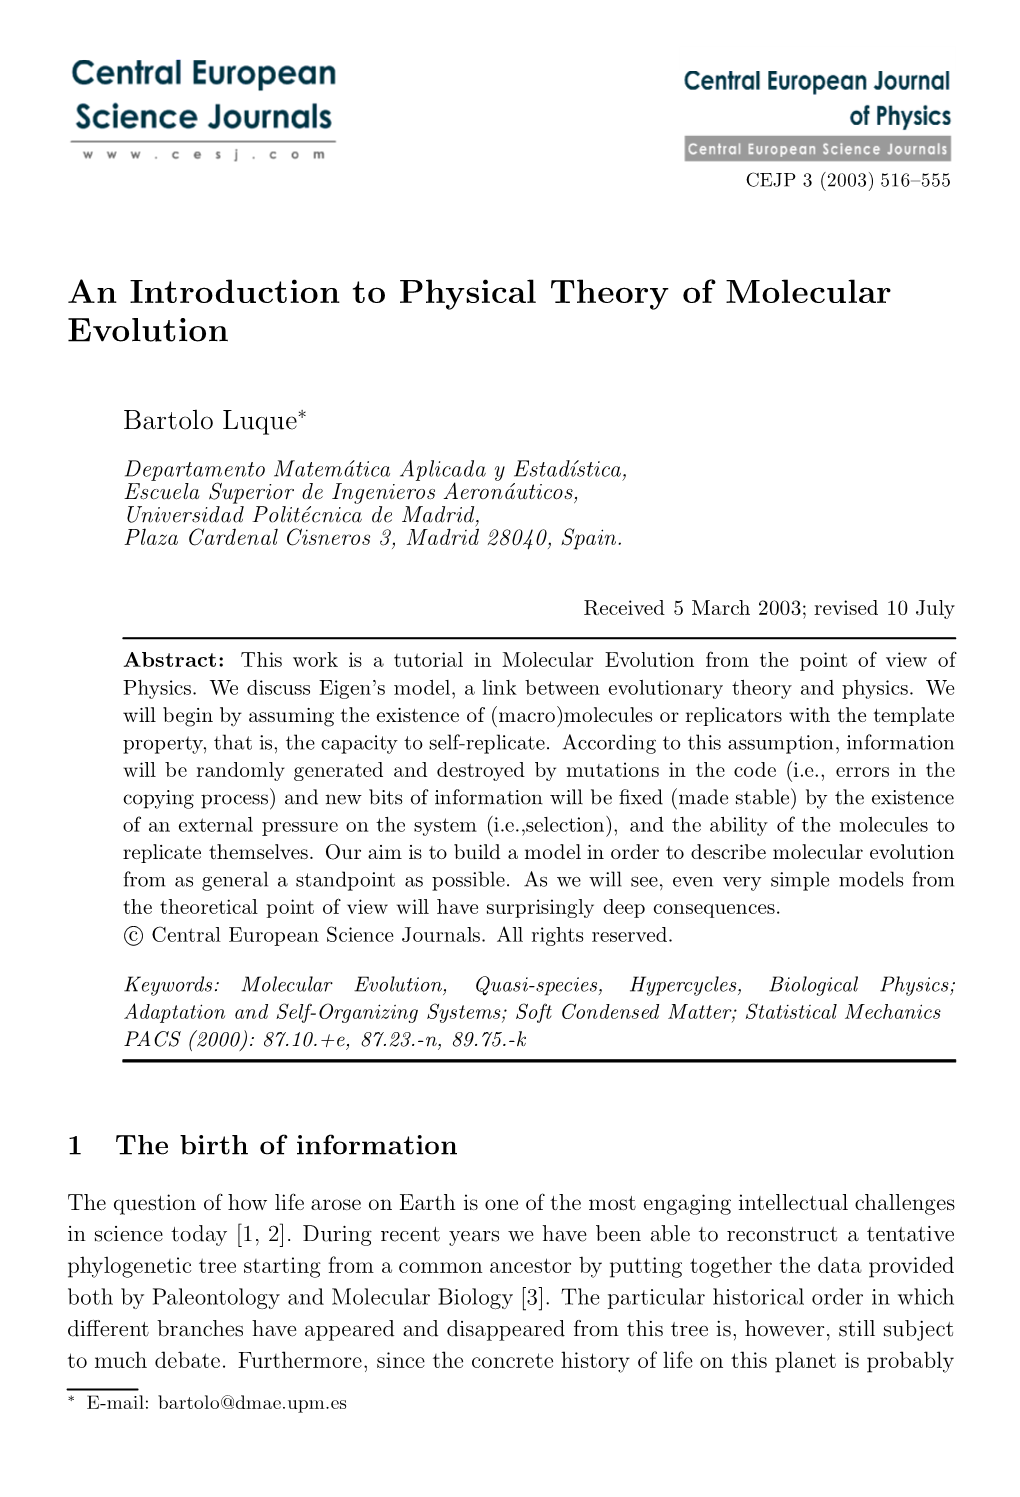 An Introduction to Physical Theory of Molecular Evolution